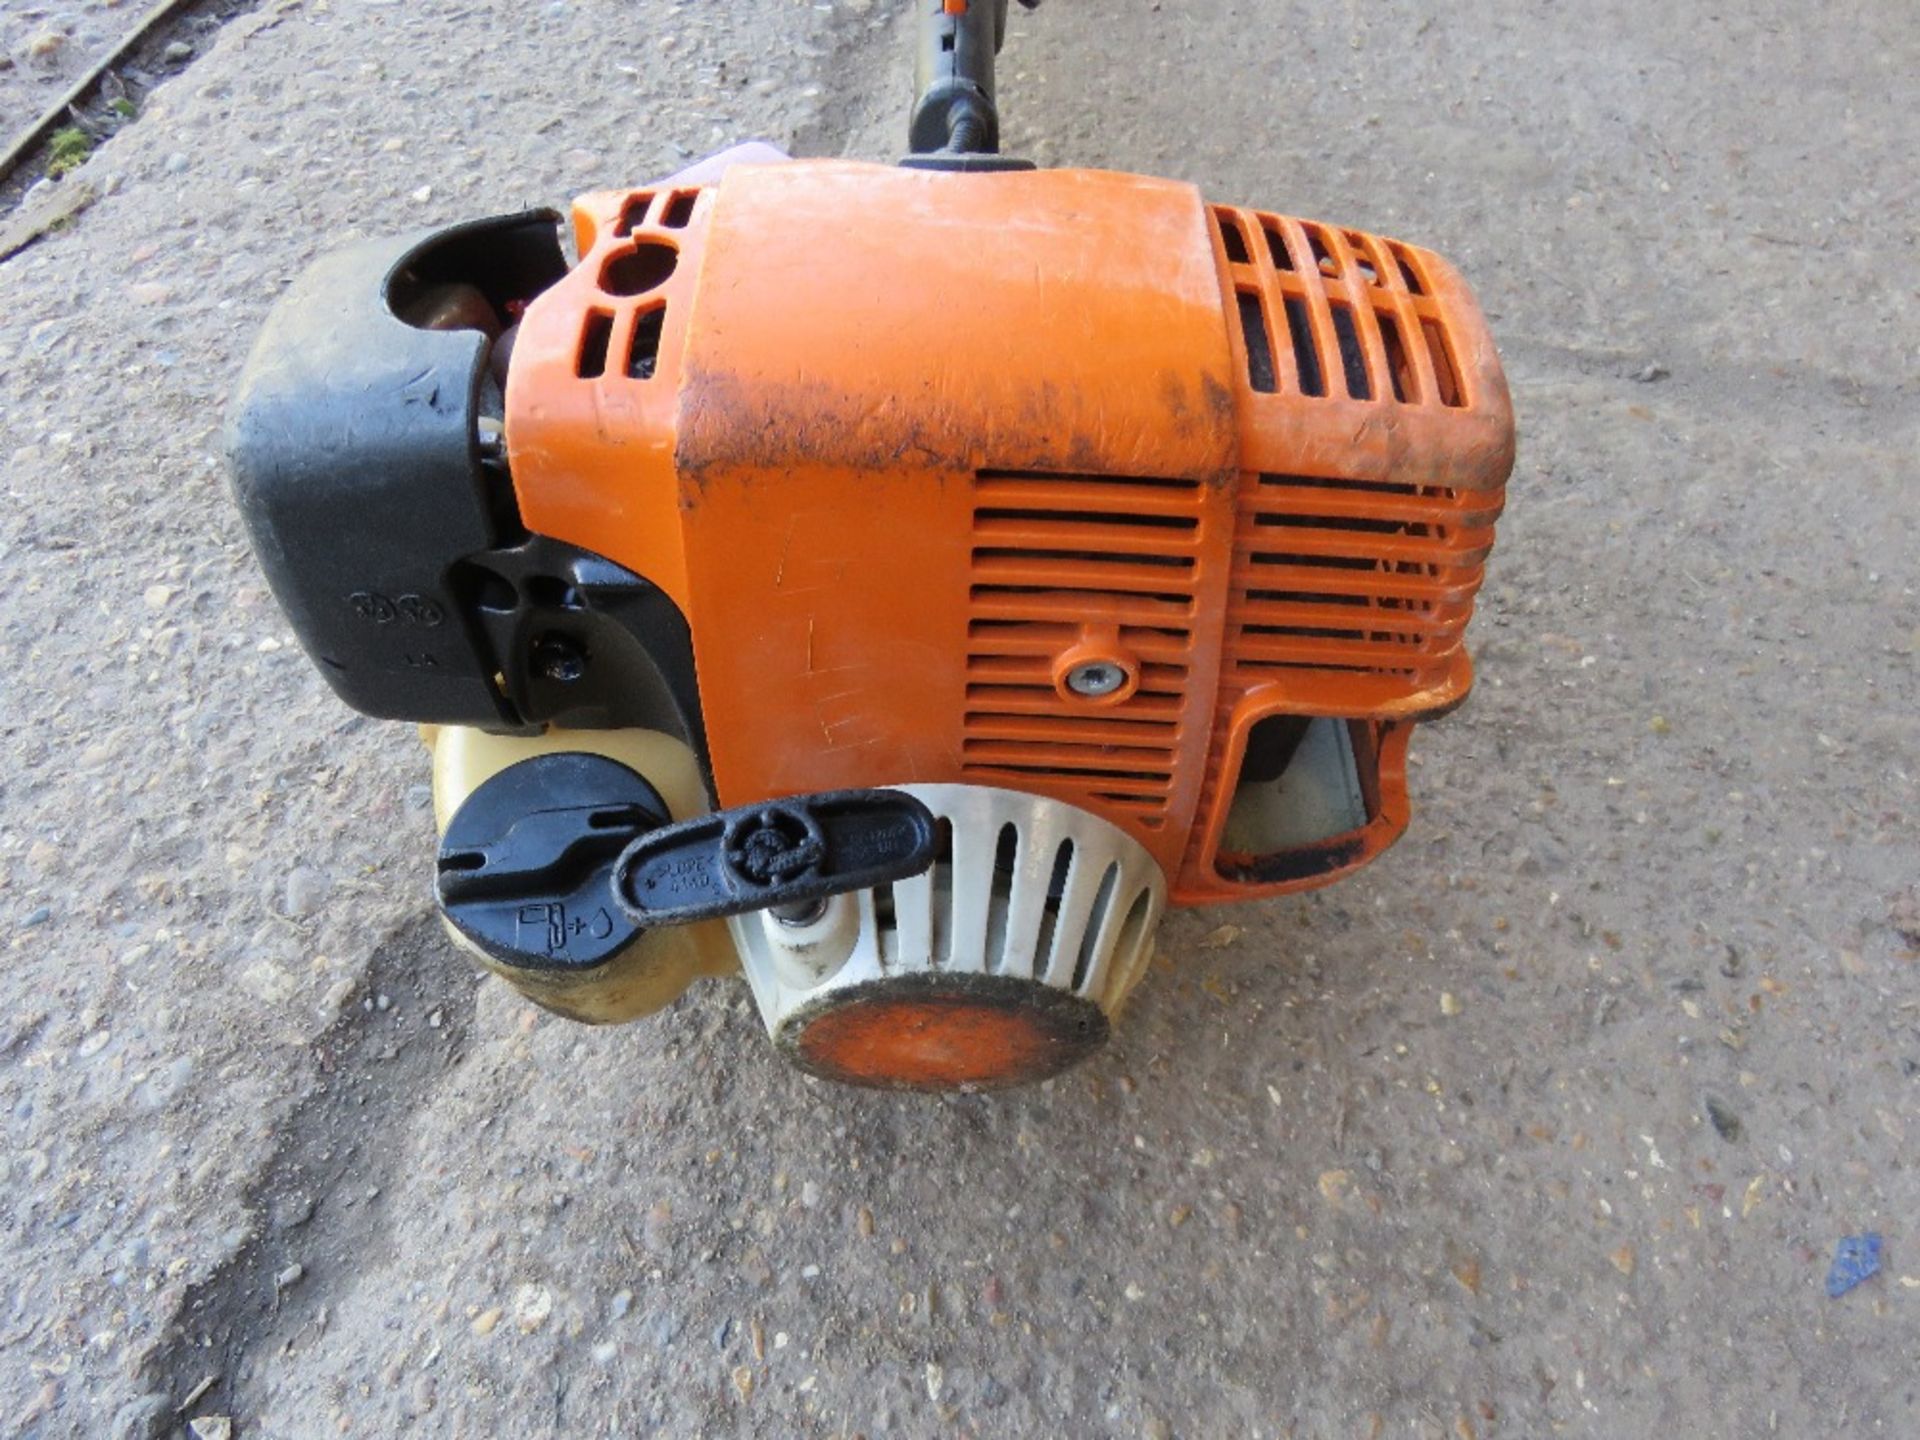 STIHL LONG REACH PETROL ENGINED HEDGE CUTTER. THIS LOT IS SOLD UNDER THE AUCTIONEERS MARGIN SCHEM - Image 2 of 6